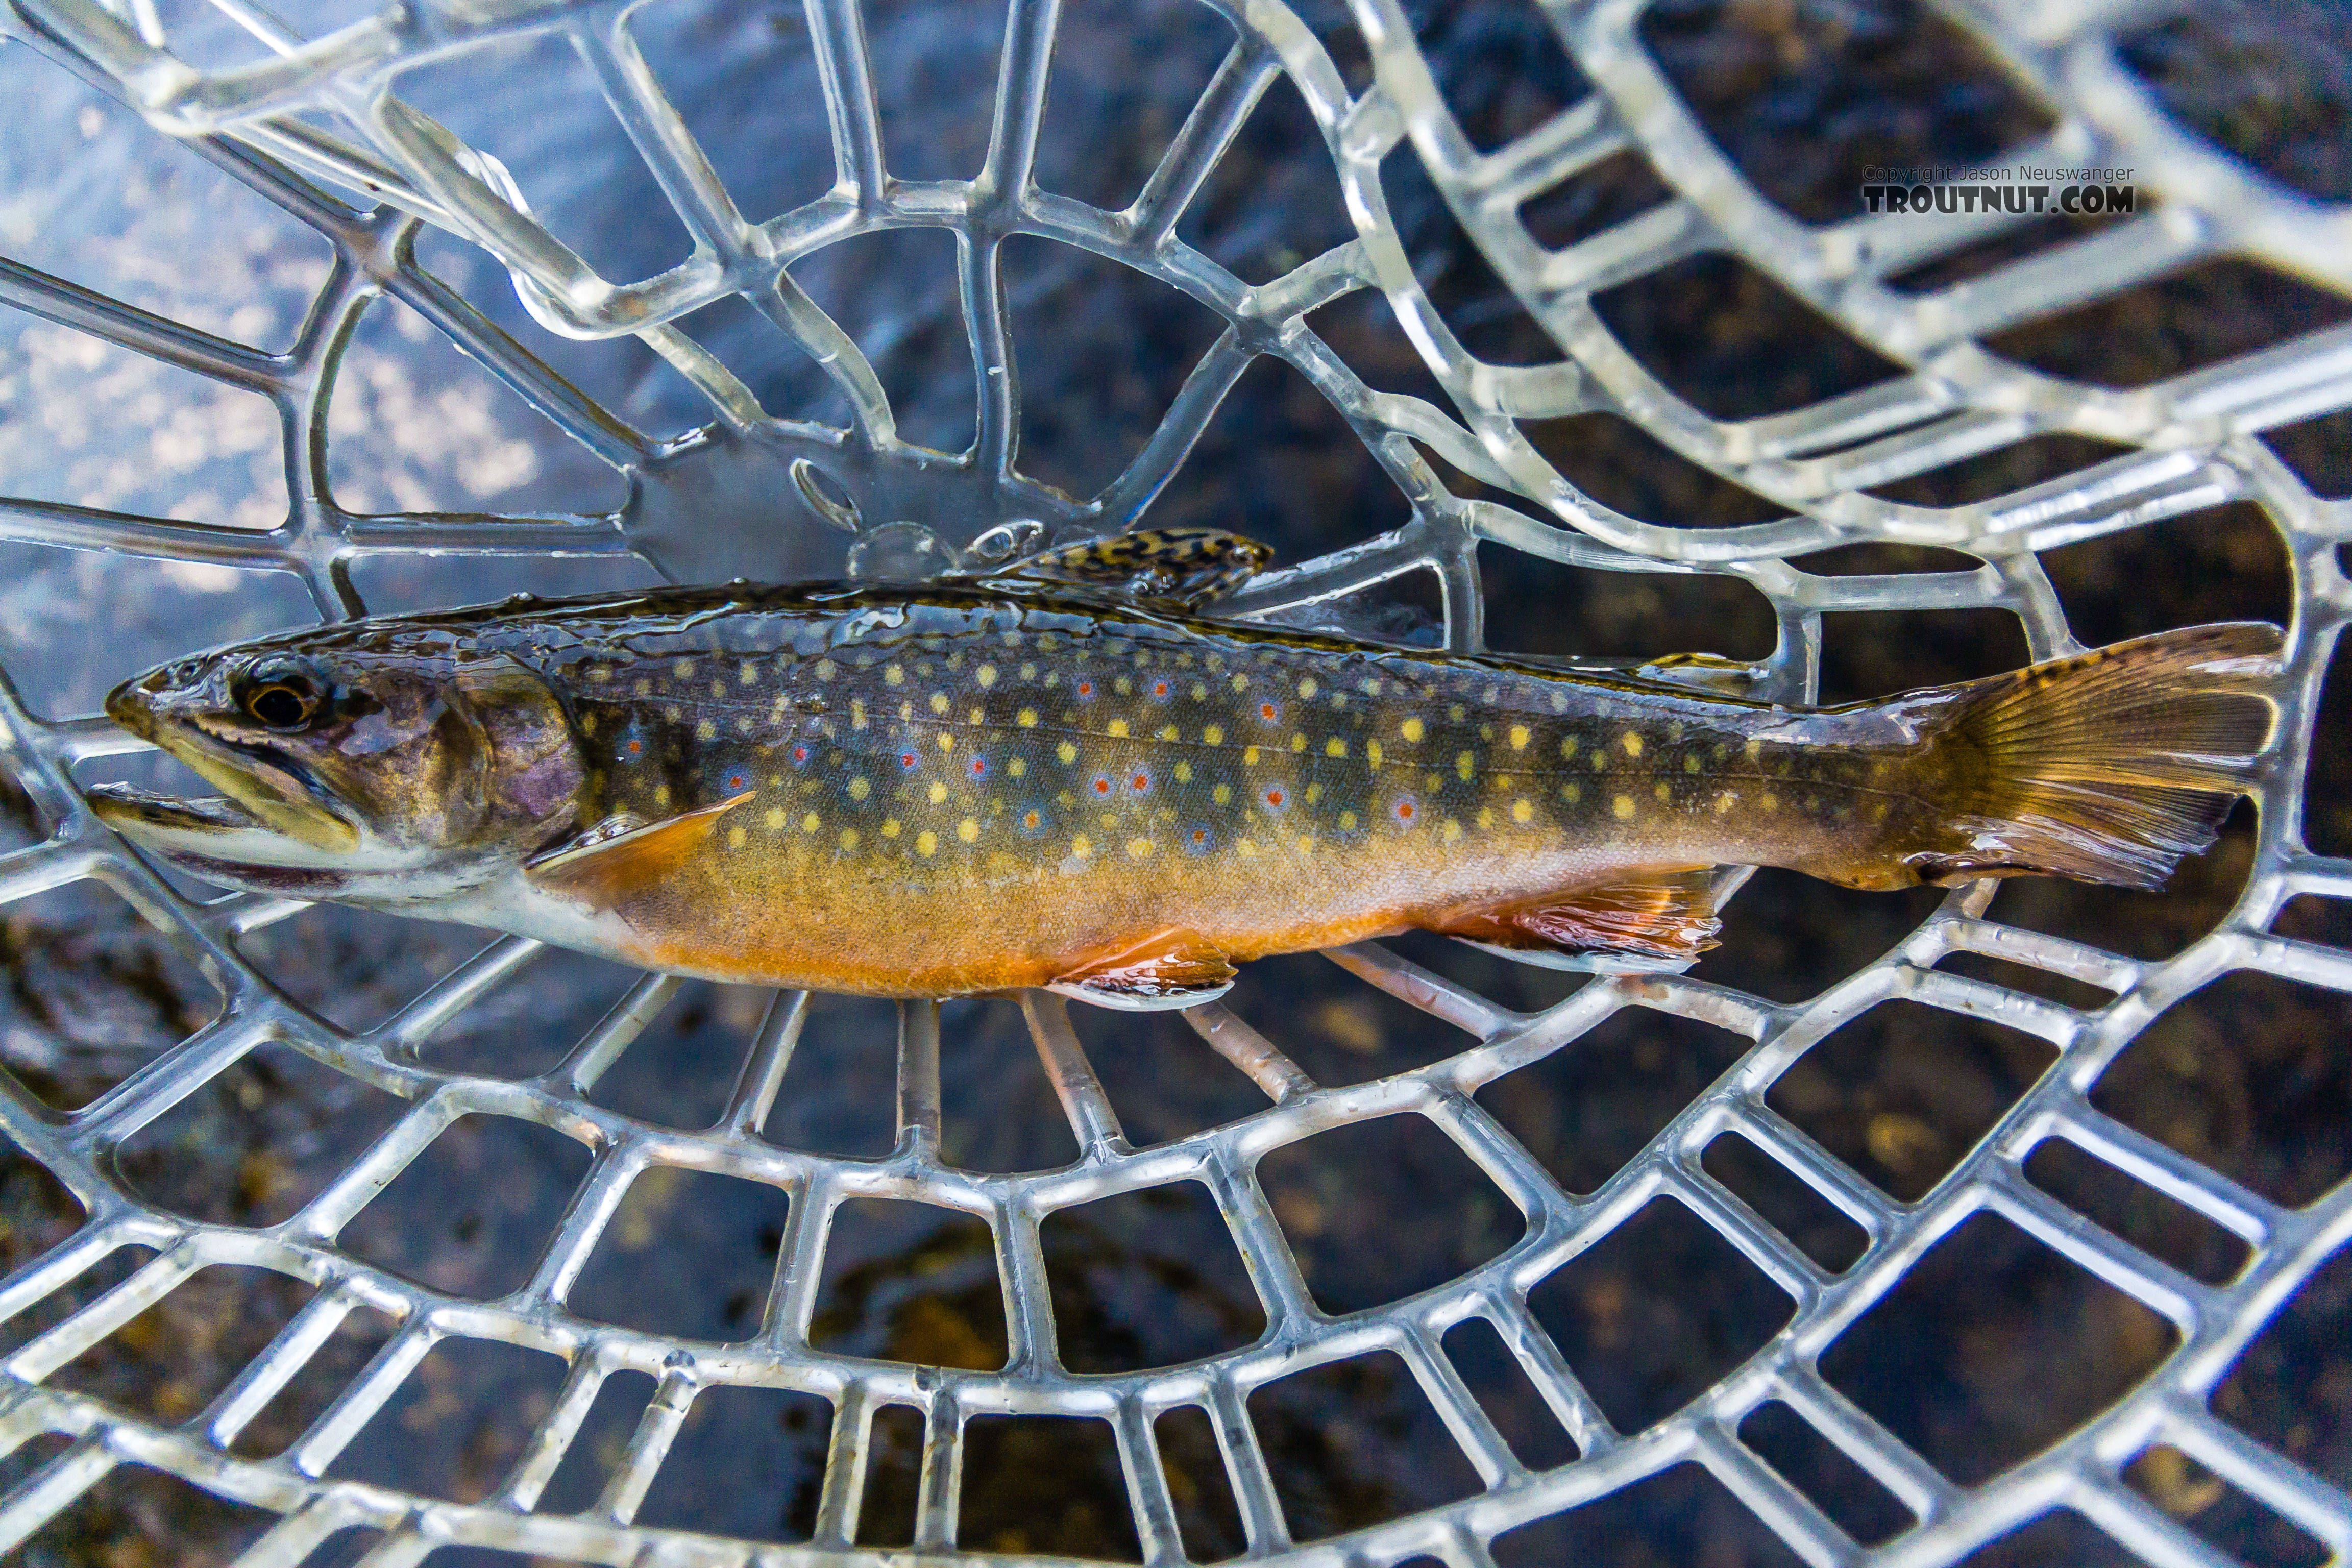 One of two nonnative Brook Trout I caught in this stream that held mostly Westslope Cutthroat. From the South Fork Manastash Creek in Washington.